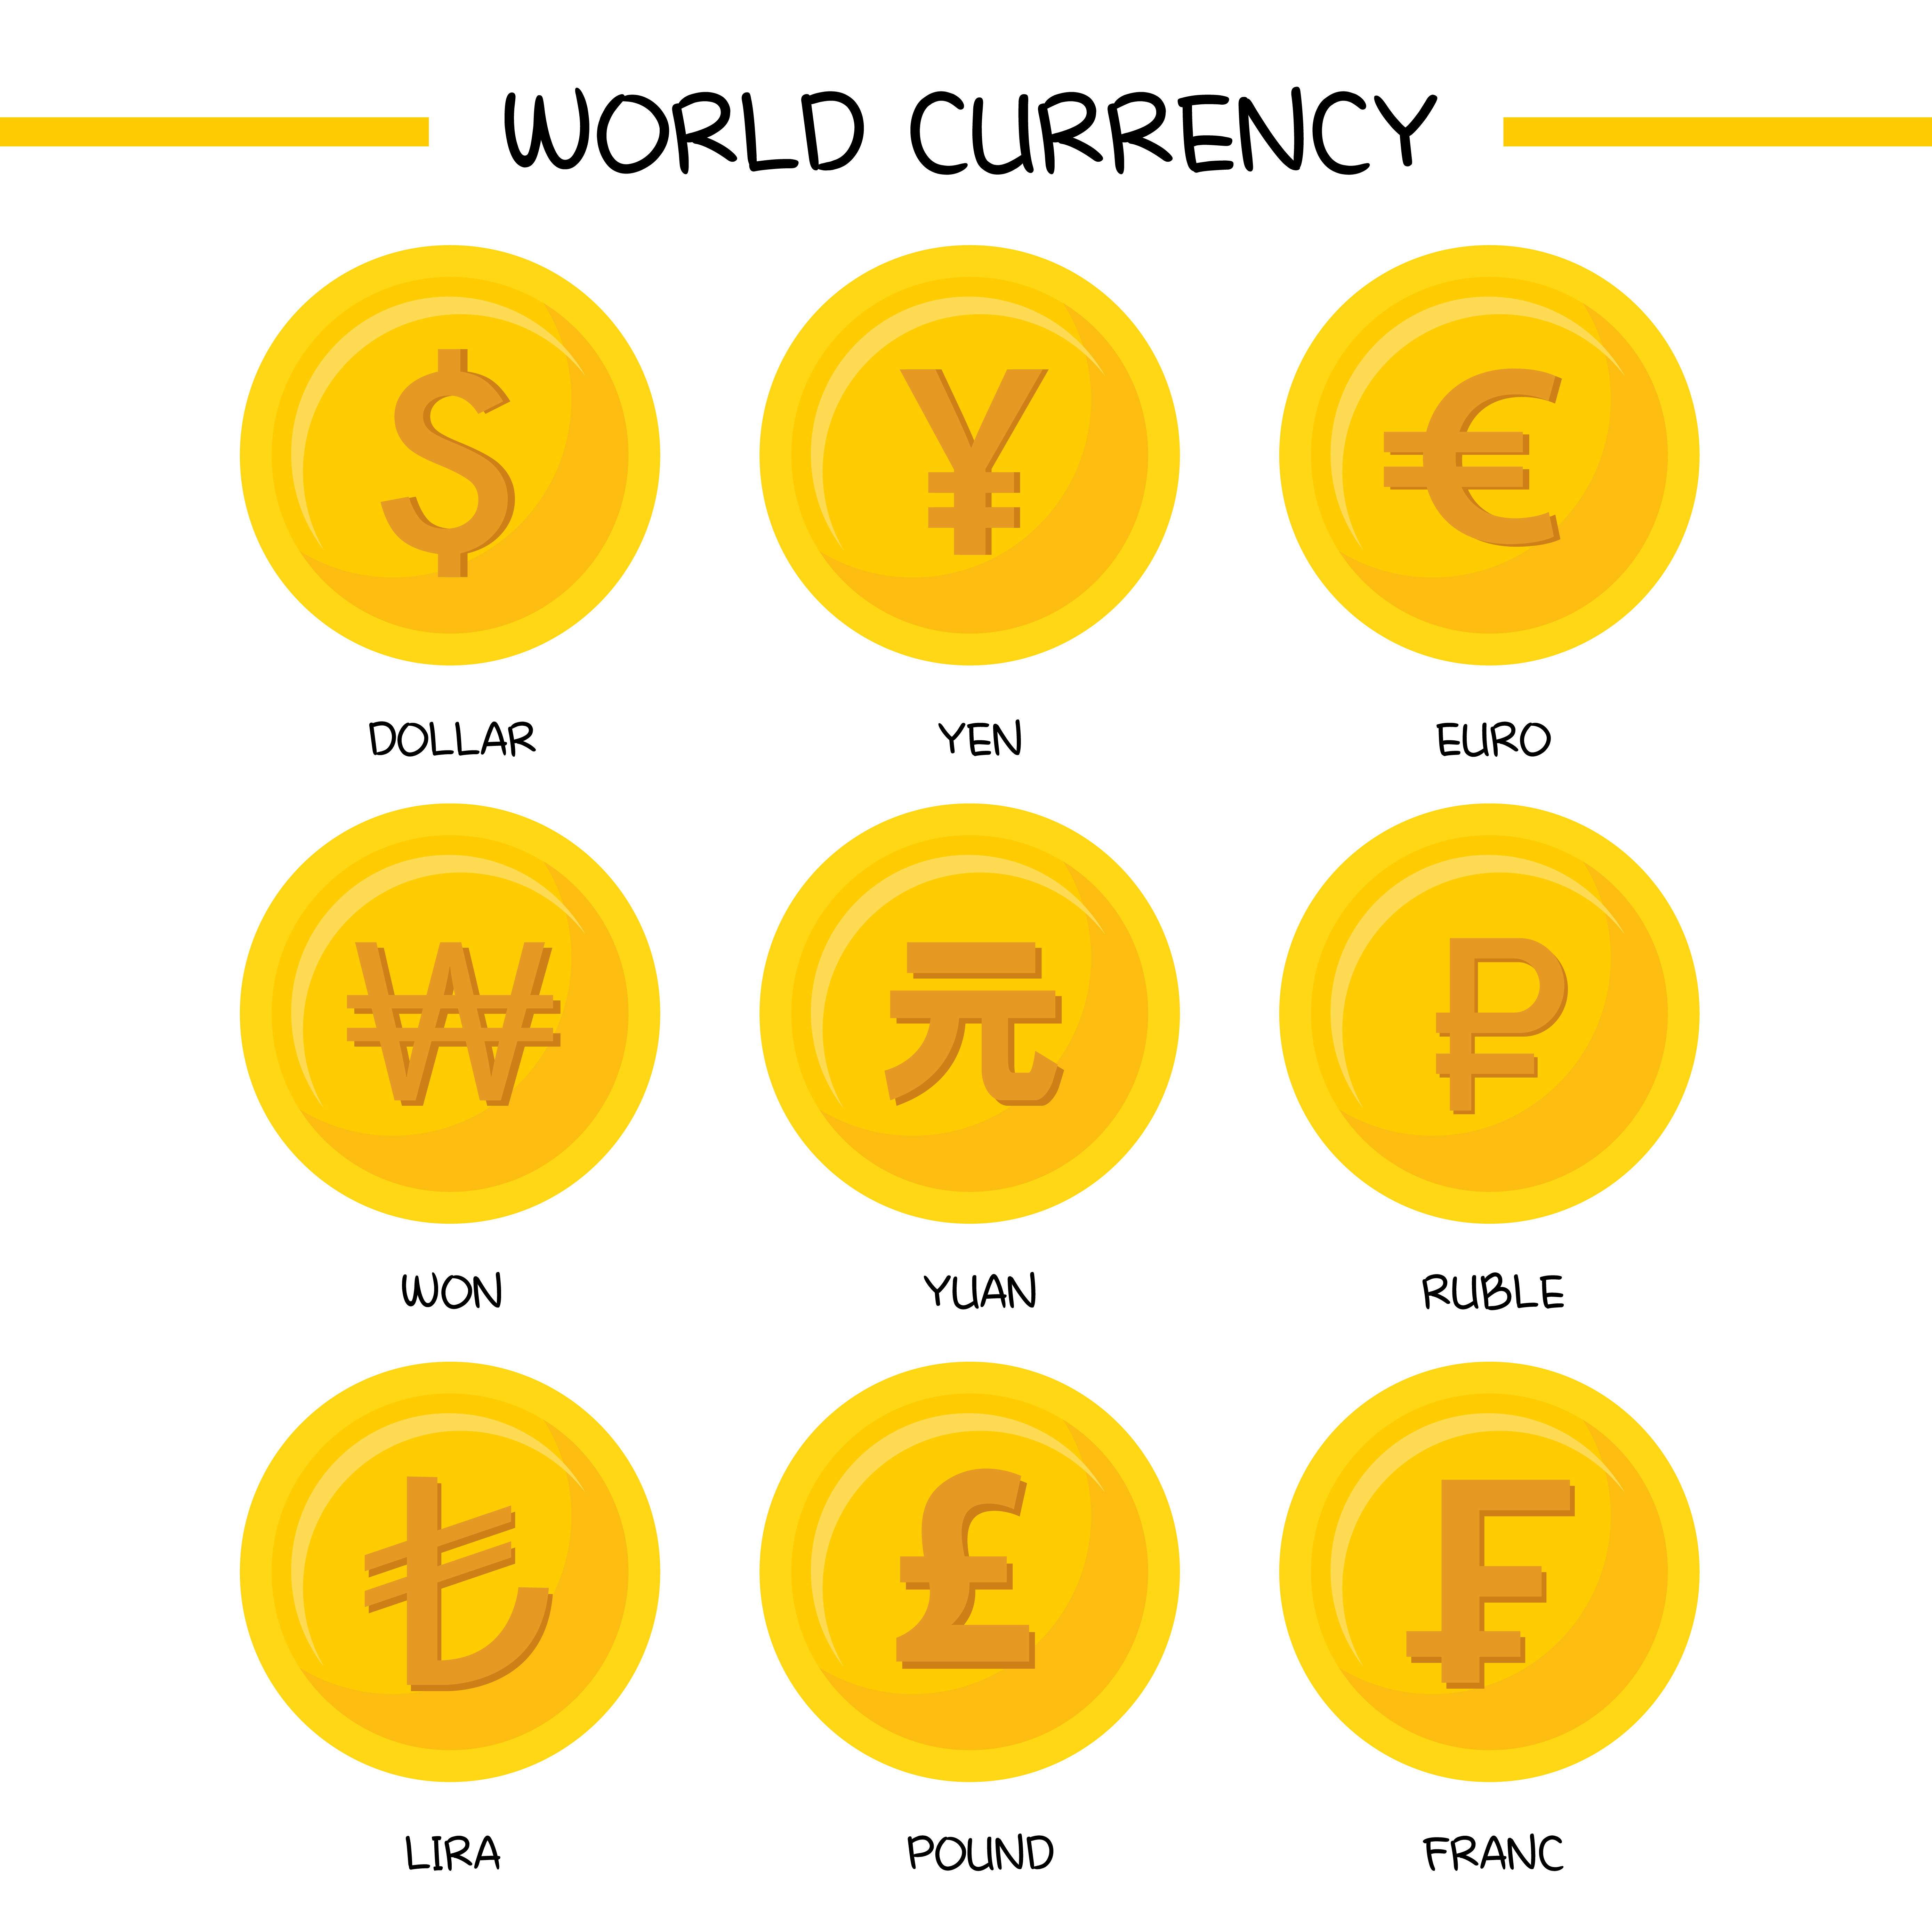 World currency